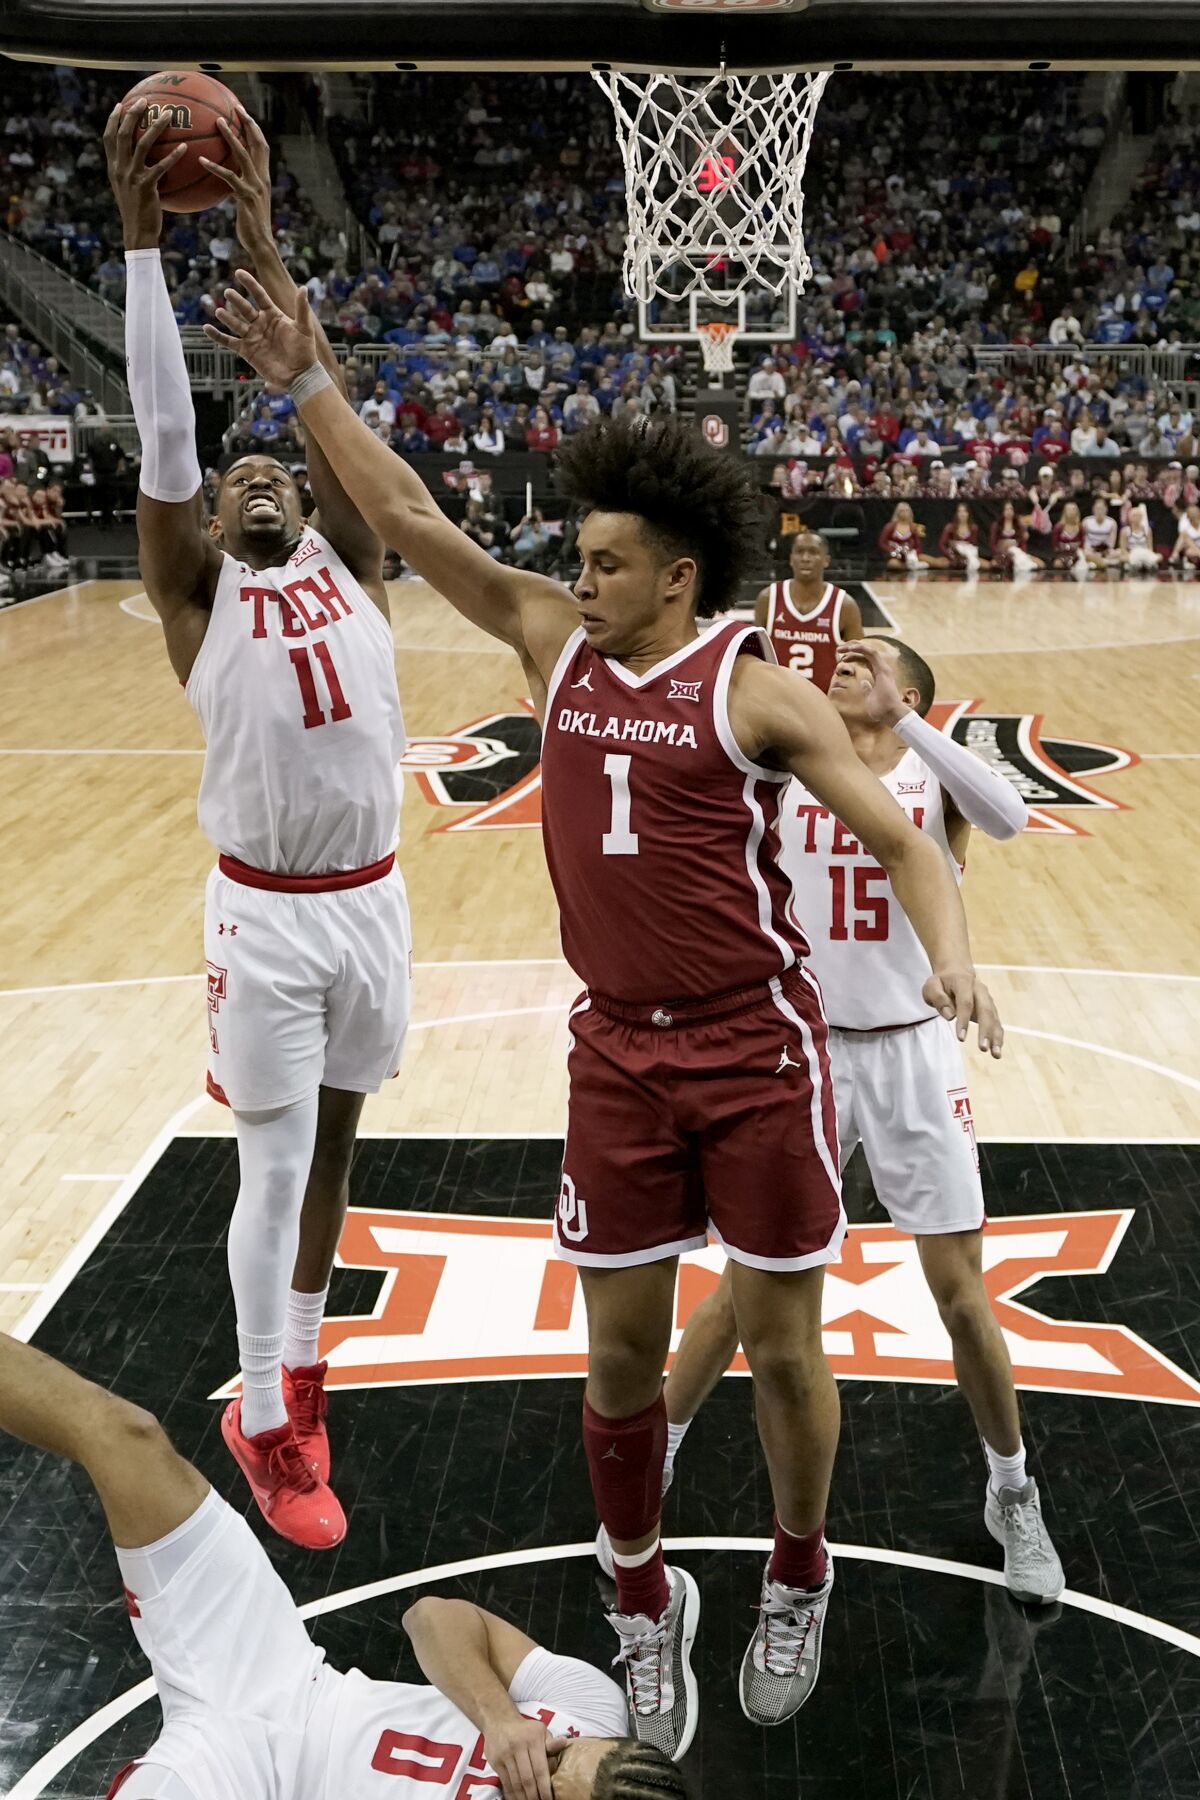 Texas Tech forward Bryson Williams (11) beats Oklahoma forward Jalen Hill (1) to a rebound during the first half of an NCAA college basketball game in the semifinal round of the Big 12 Conference tournament in Kansas City, Mo., Friday, March 11, 2022. (AP Photo/Charlie Riedel)